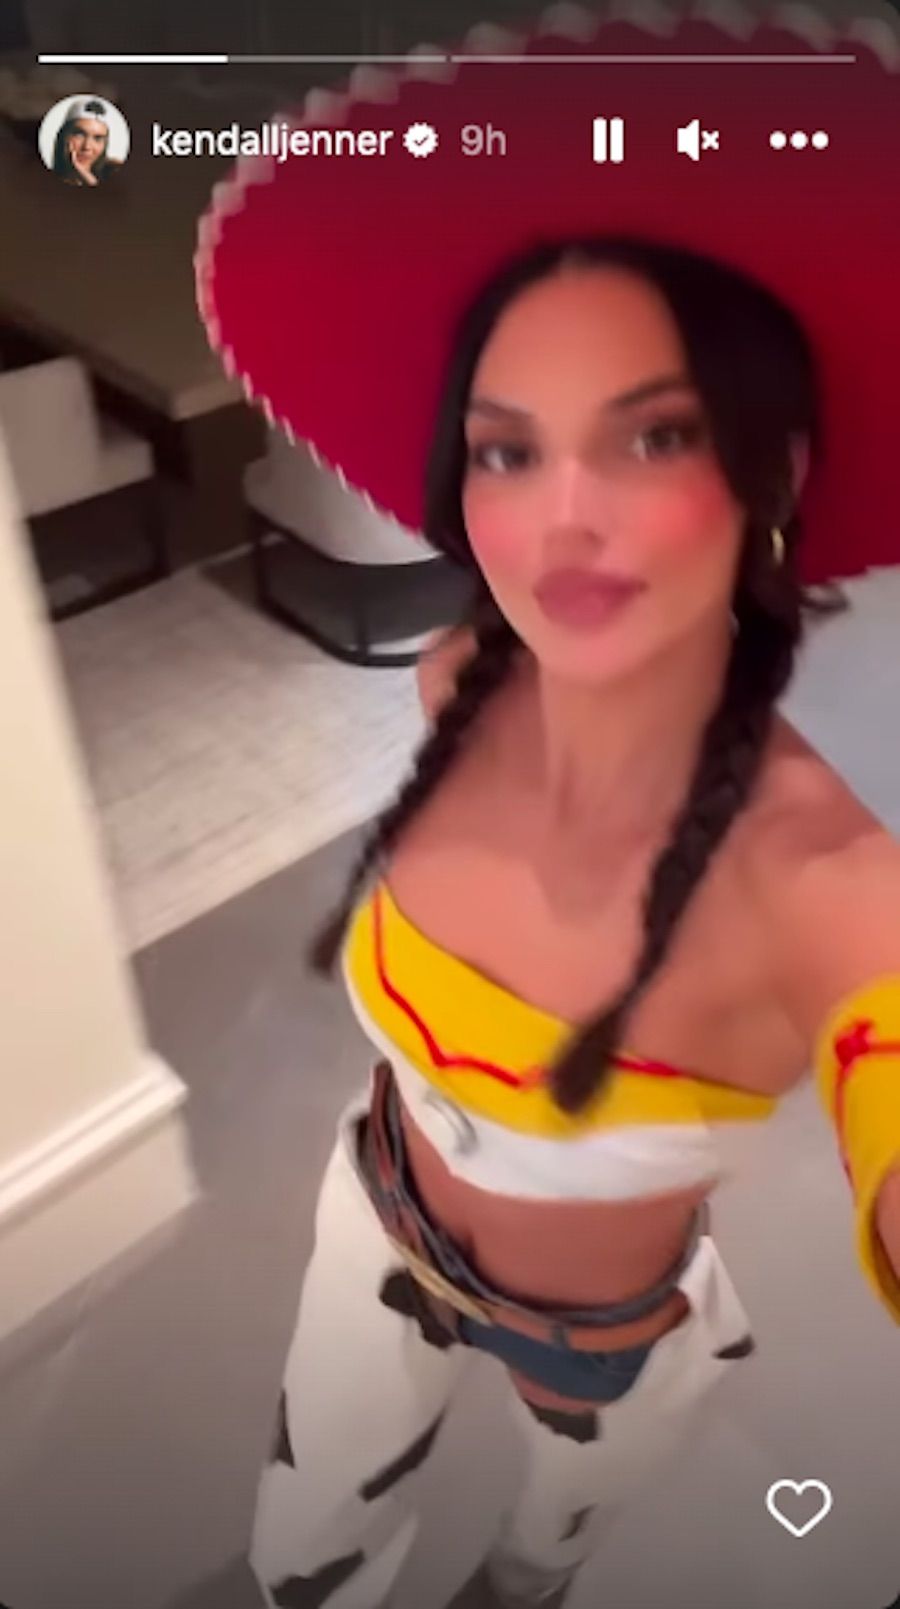 Kendall Jenner Goes Giddy-Up With Sexy Toy Story Halloween Look